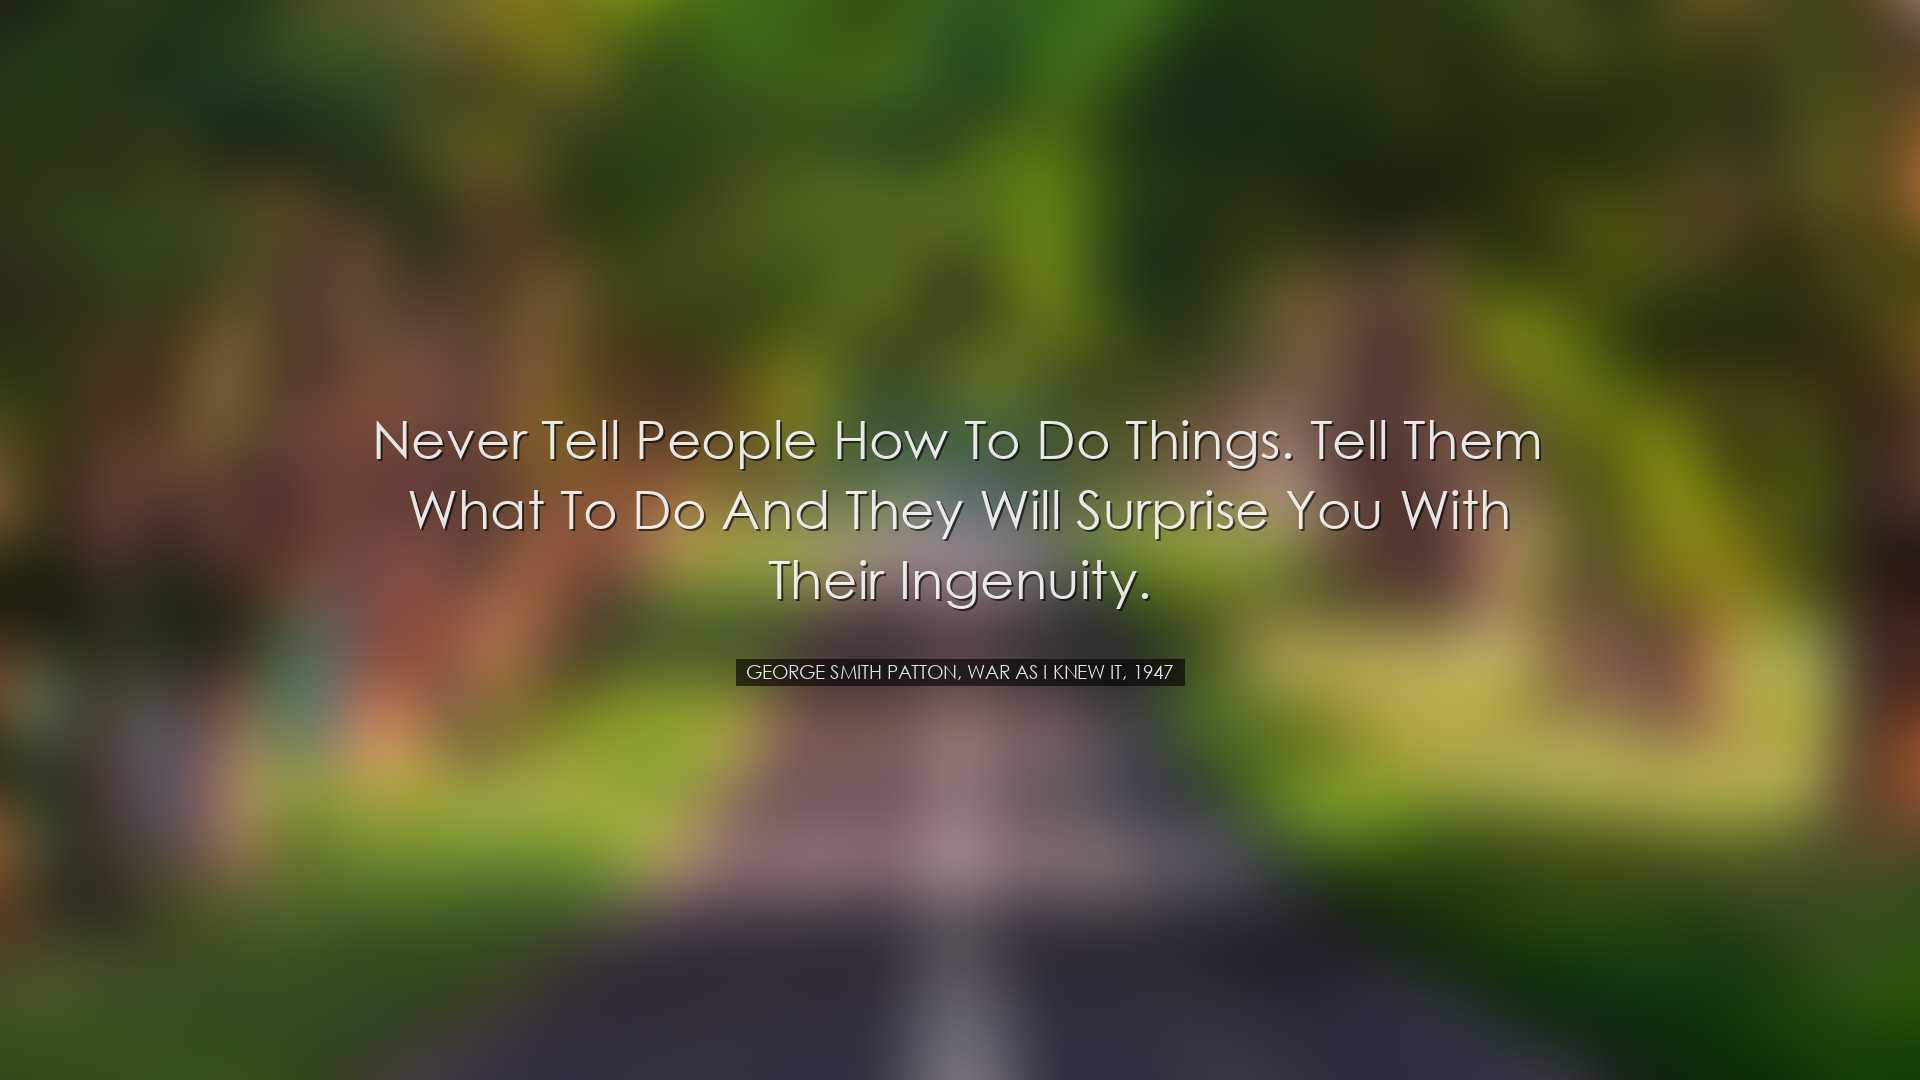 Never tell people how to do things. Tell them what to do and they